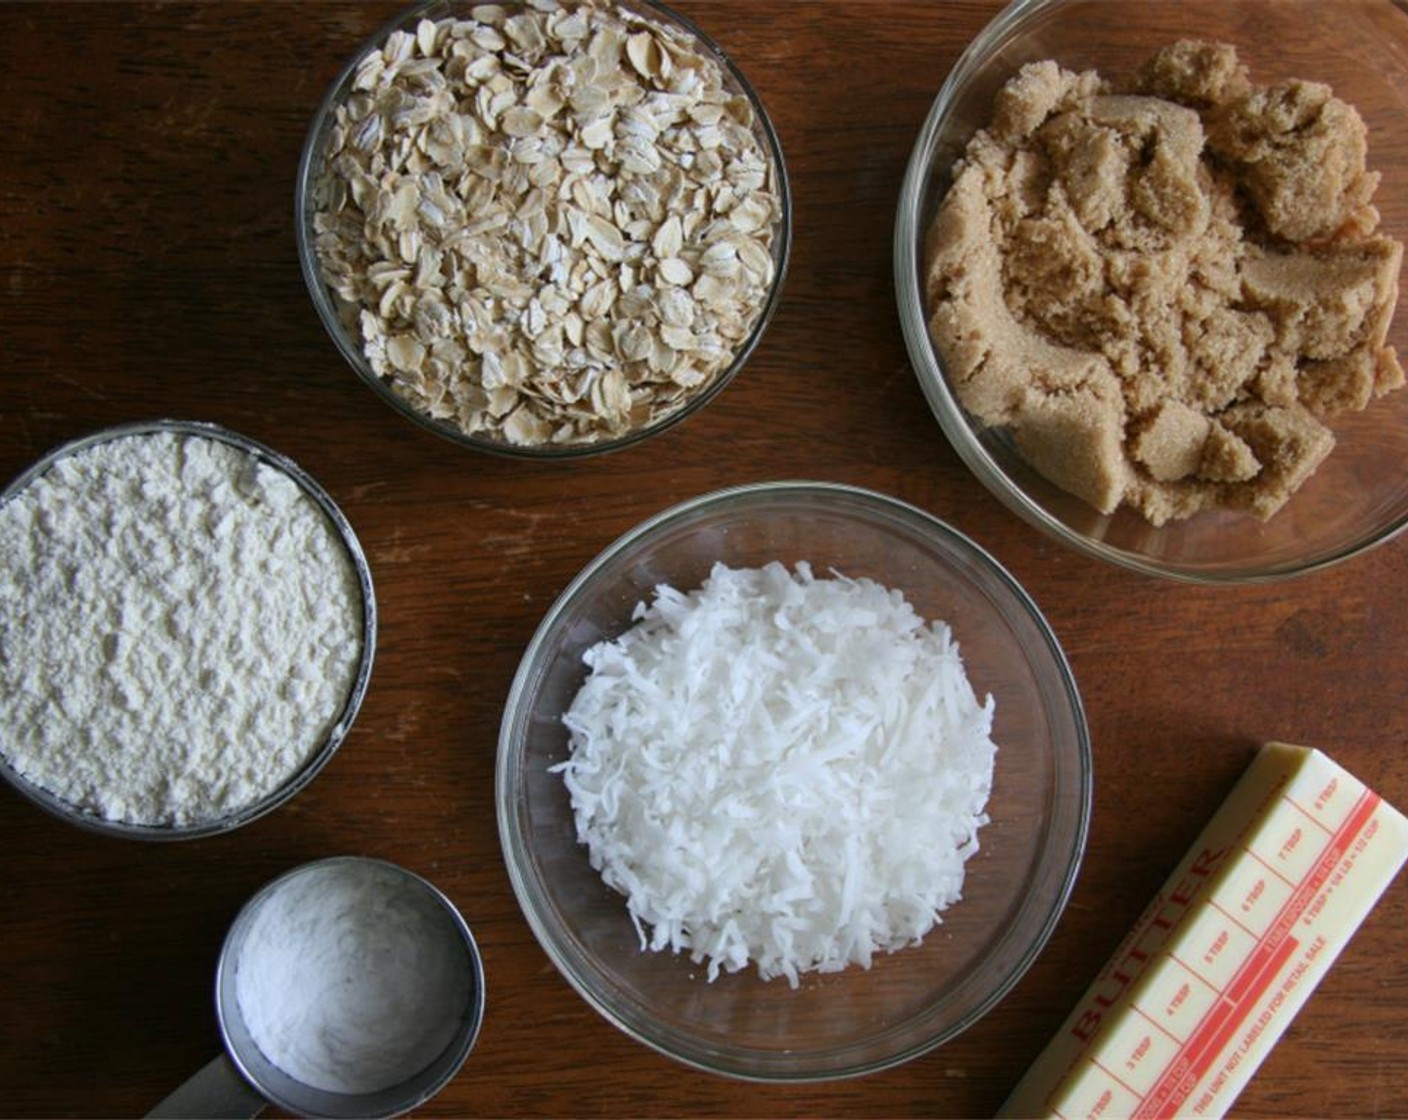 step 2 Combine All-Purpose Flour (1 cup), Old Fashioned Rolled Oats (1 cup), Unsweetened Shredded Coconut (1/2 cup), and Brown Sugar (2/3 cup).